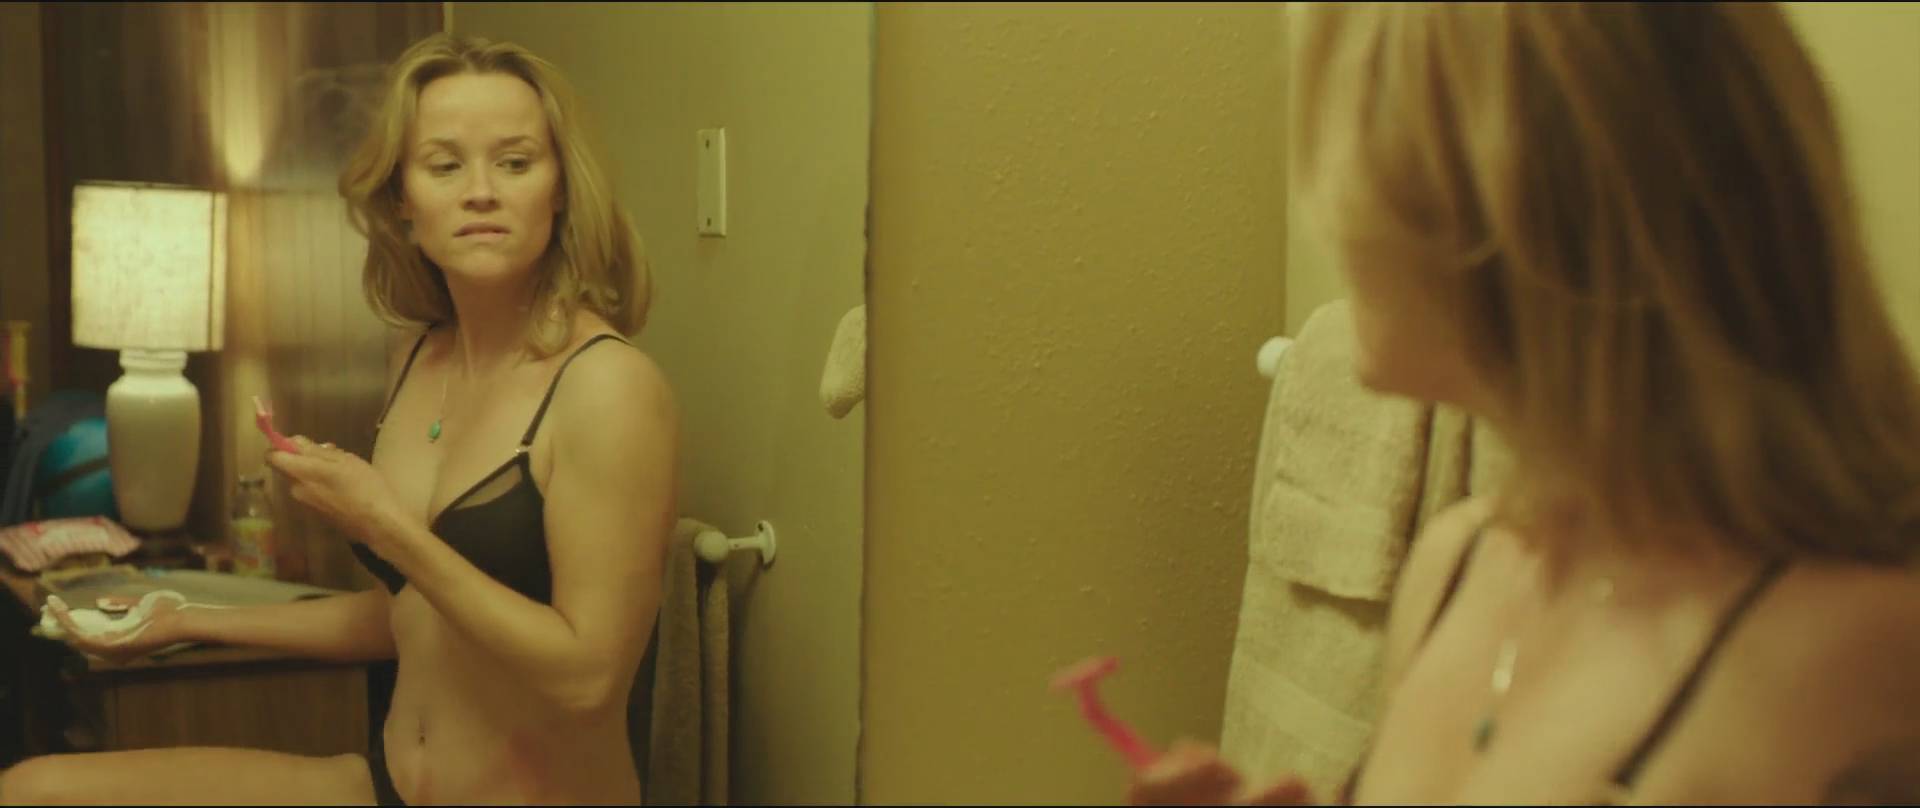 Reese Witherspoon - Wild (2014) "Topless/SEX" Scene HD 1080p. 